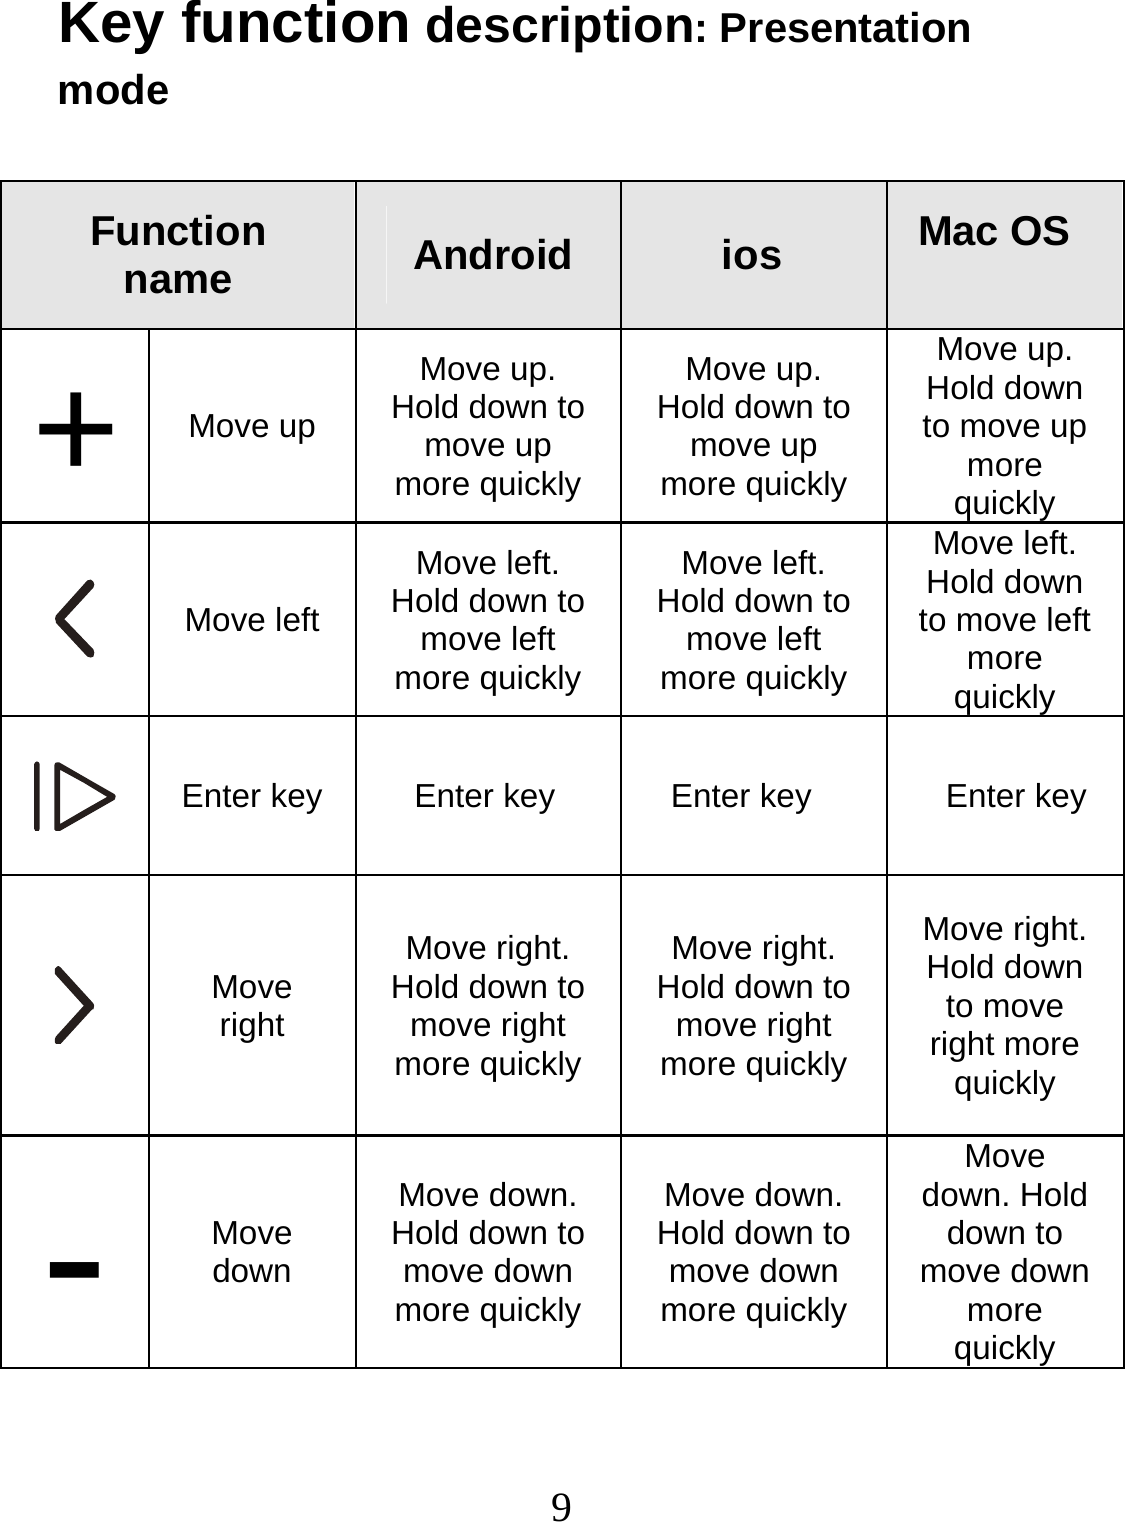  9 Key function description: Presentation mode  Function name  Android        ios  Mac OS +  Move up Move up. Hold down to move up more quickly Move up. Hold down to move up more quickly Move up. Hold down to move up more quickly  Move leftMove left. Hold down to move left more quickly Move left. Hold down to move left more quickly Move left. Hold down to move left more quickly  Enter key     Enter key   Enter key    Enter key Move right Move right. Hold down to move right more quickly Move right. Hold down to move right more quickly Move right. Hold down to move right more quickly -  Move down Move down. Hold down to move down more quickly Move down. Hold down to move down more quickly Move down. Hold down to move down more quickly 